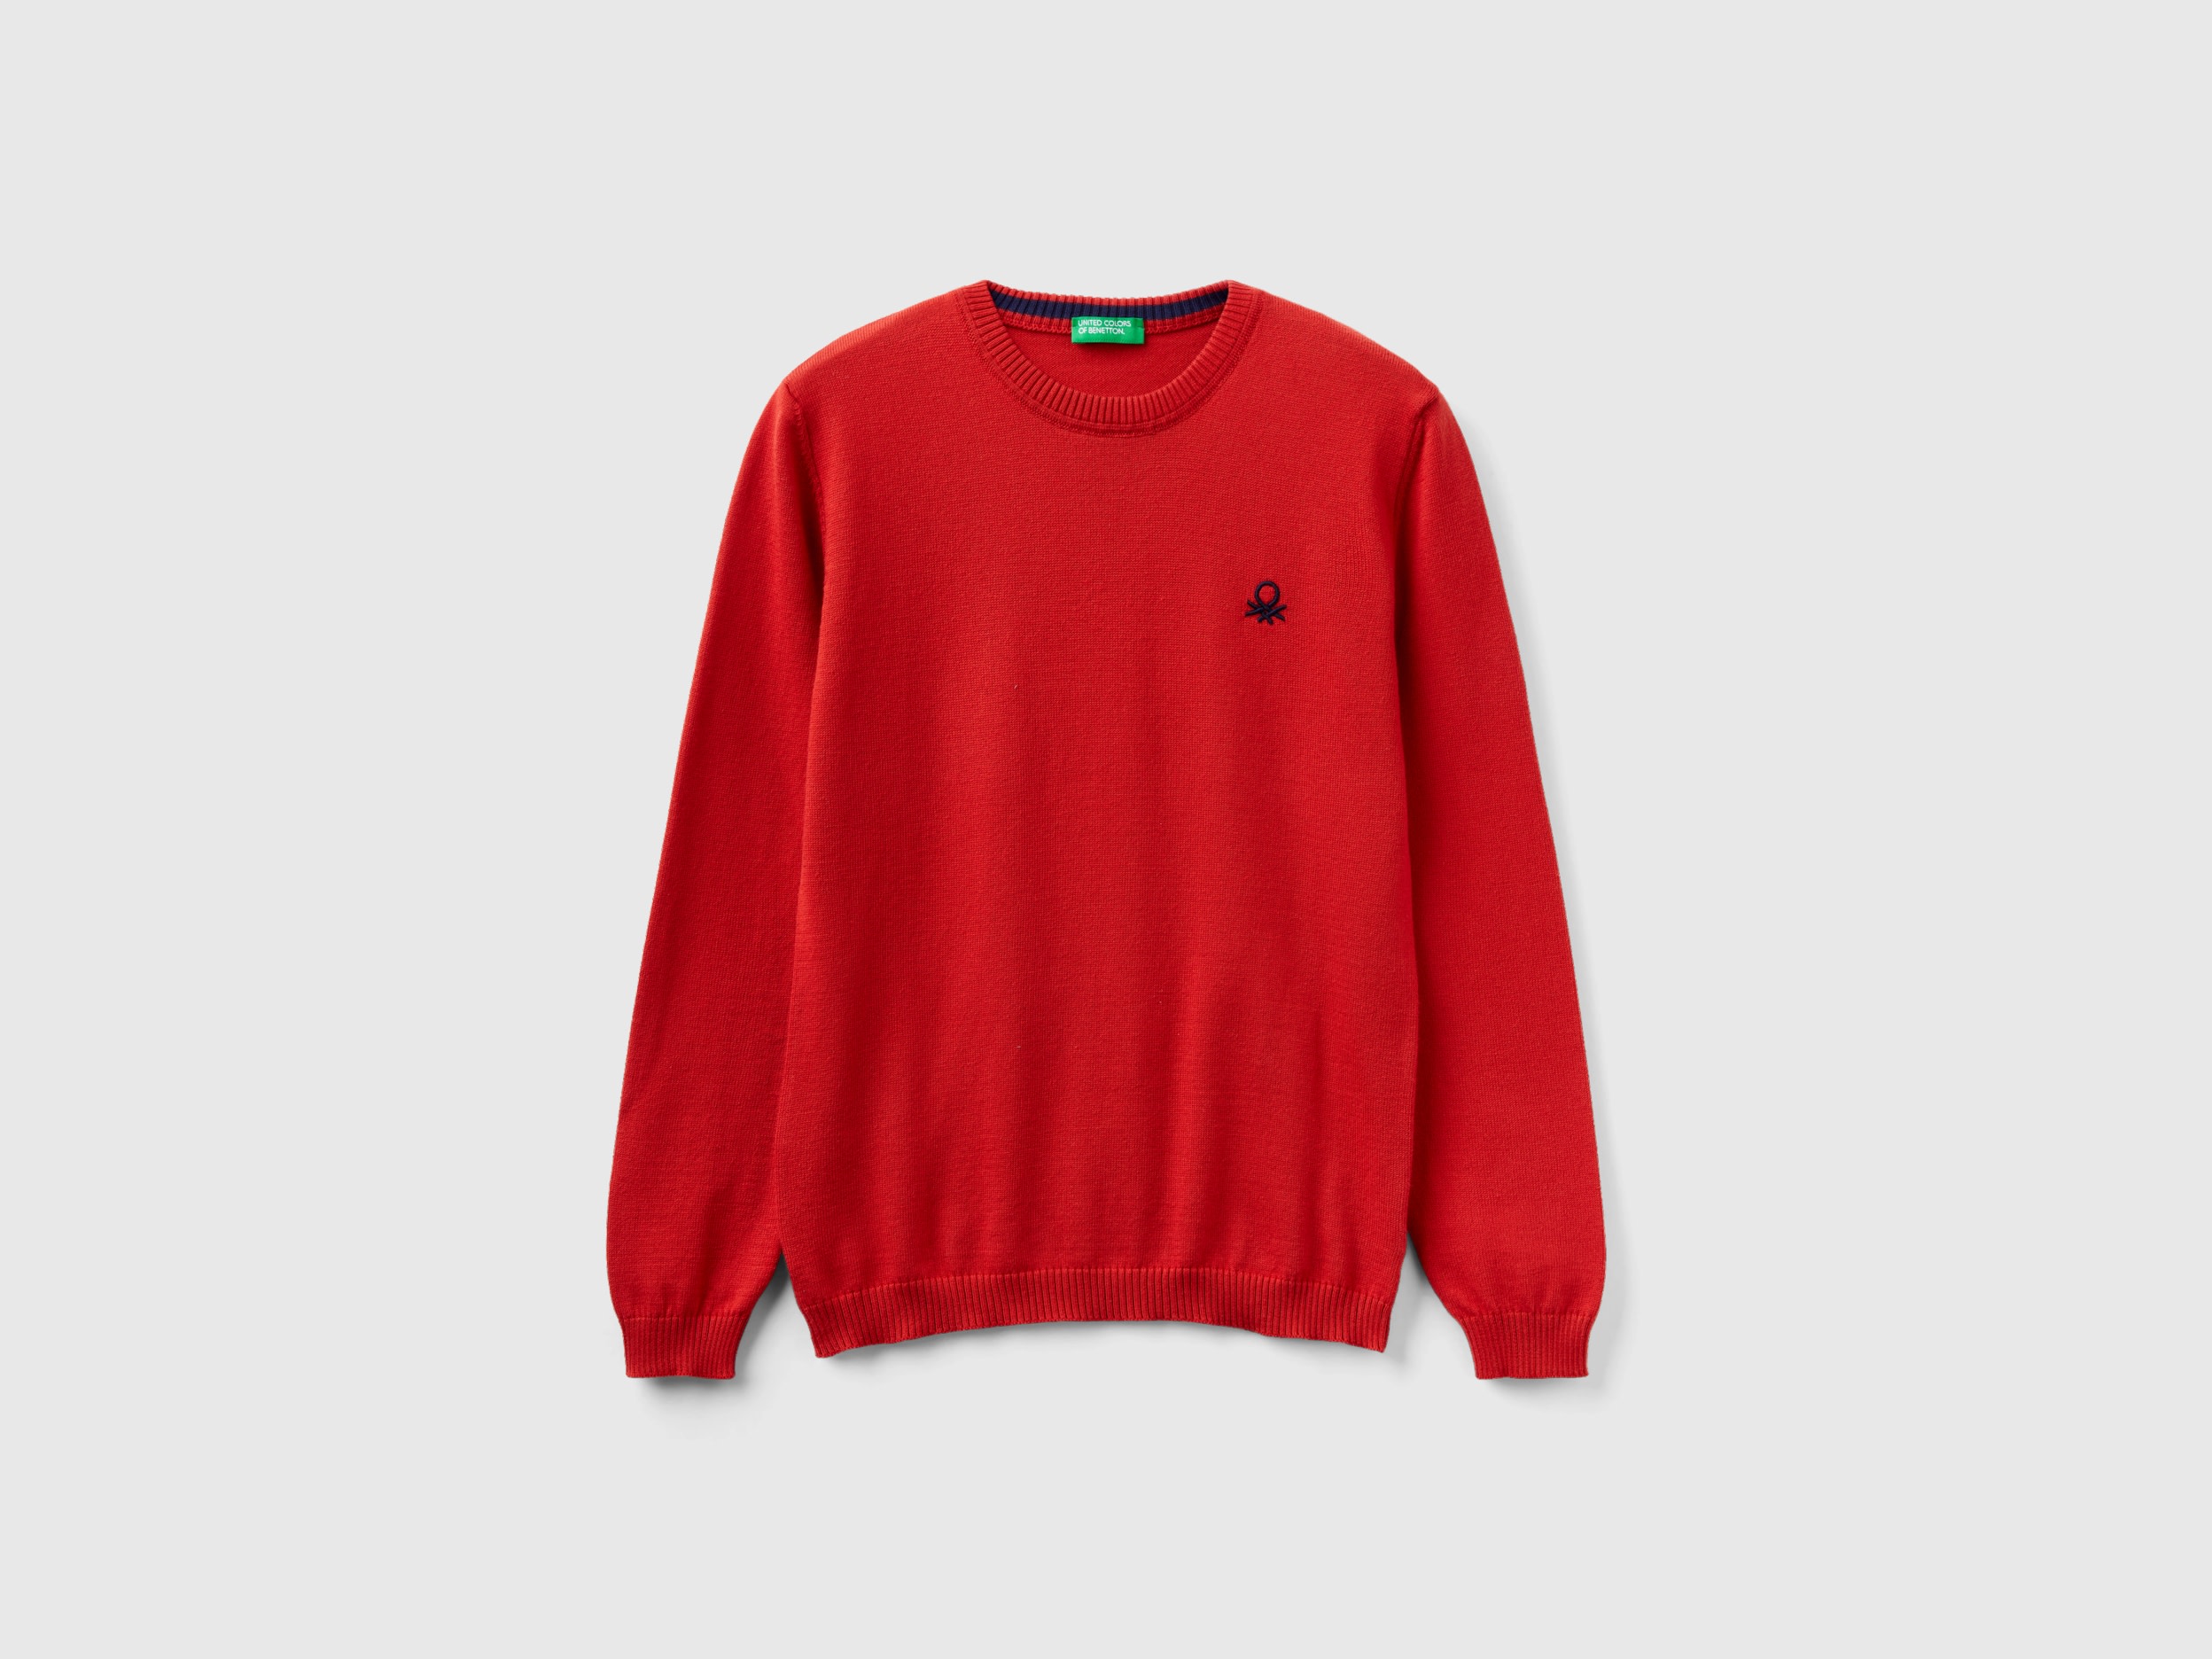 Benetton, Sweater In Pure Cotton With Logo, size L, Brick Red, Kids